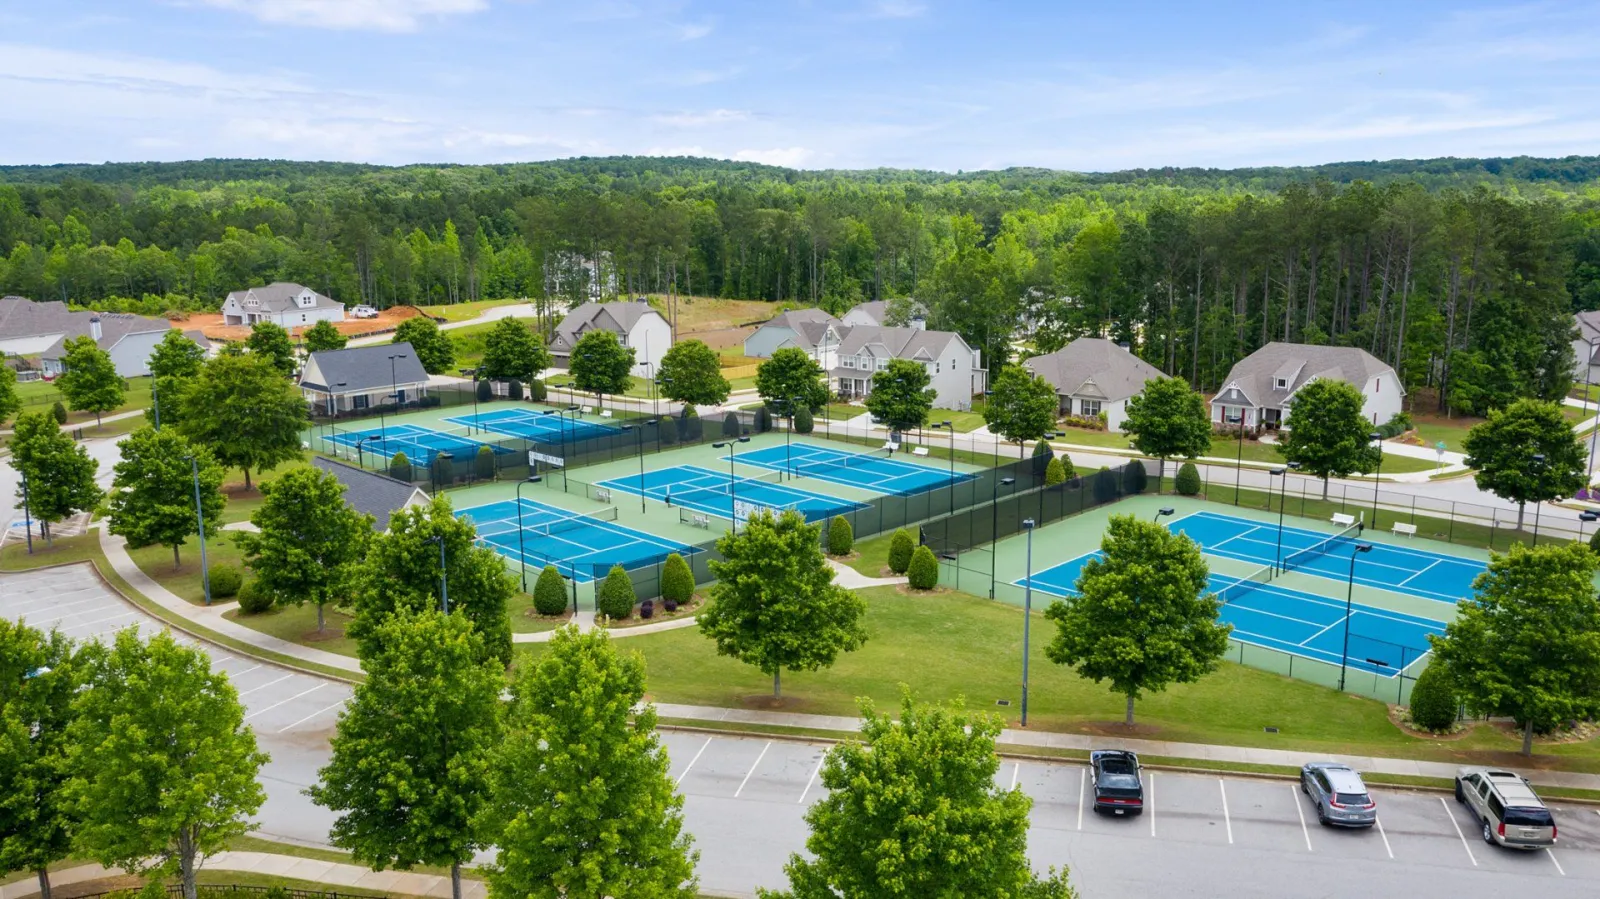 an overhead view of the seven tennis courts